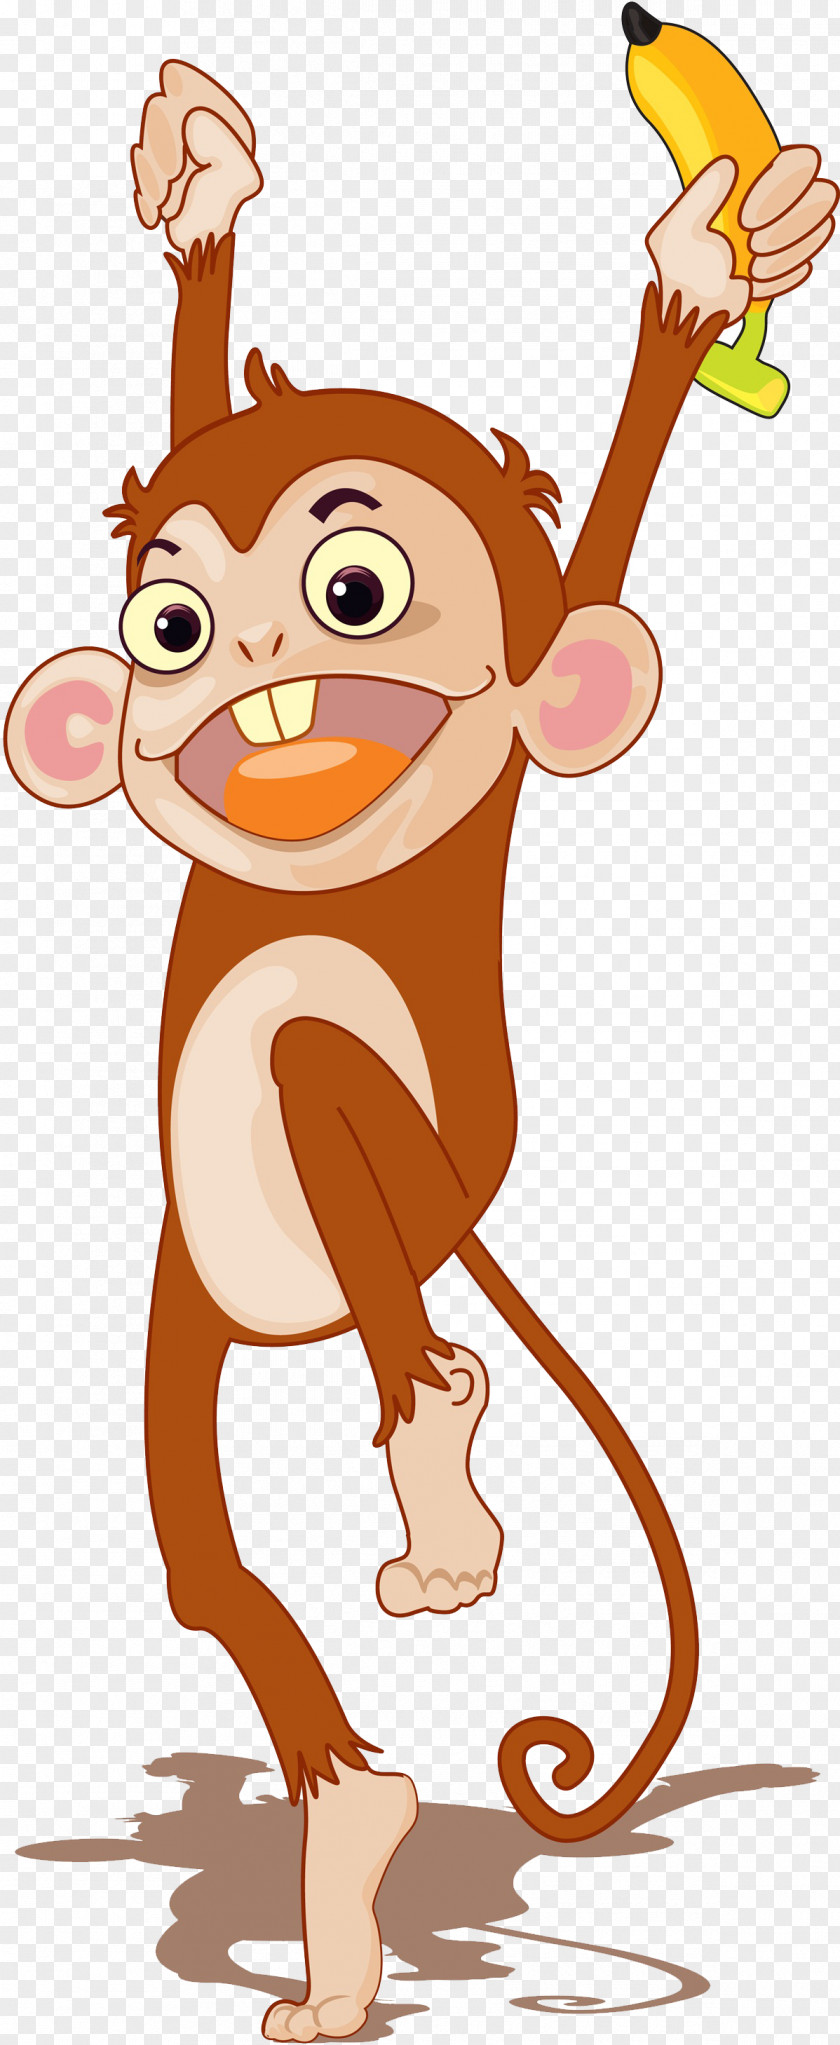 The Monkey With Banana Cartoon Photography Illustration PNG